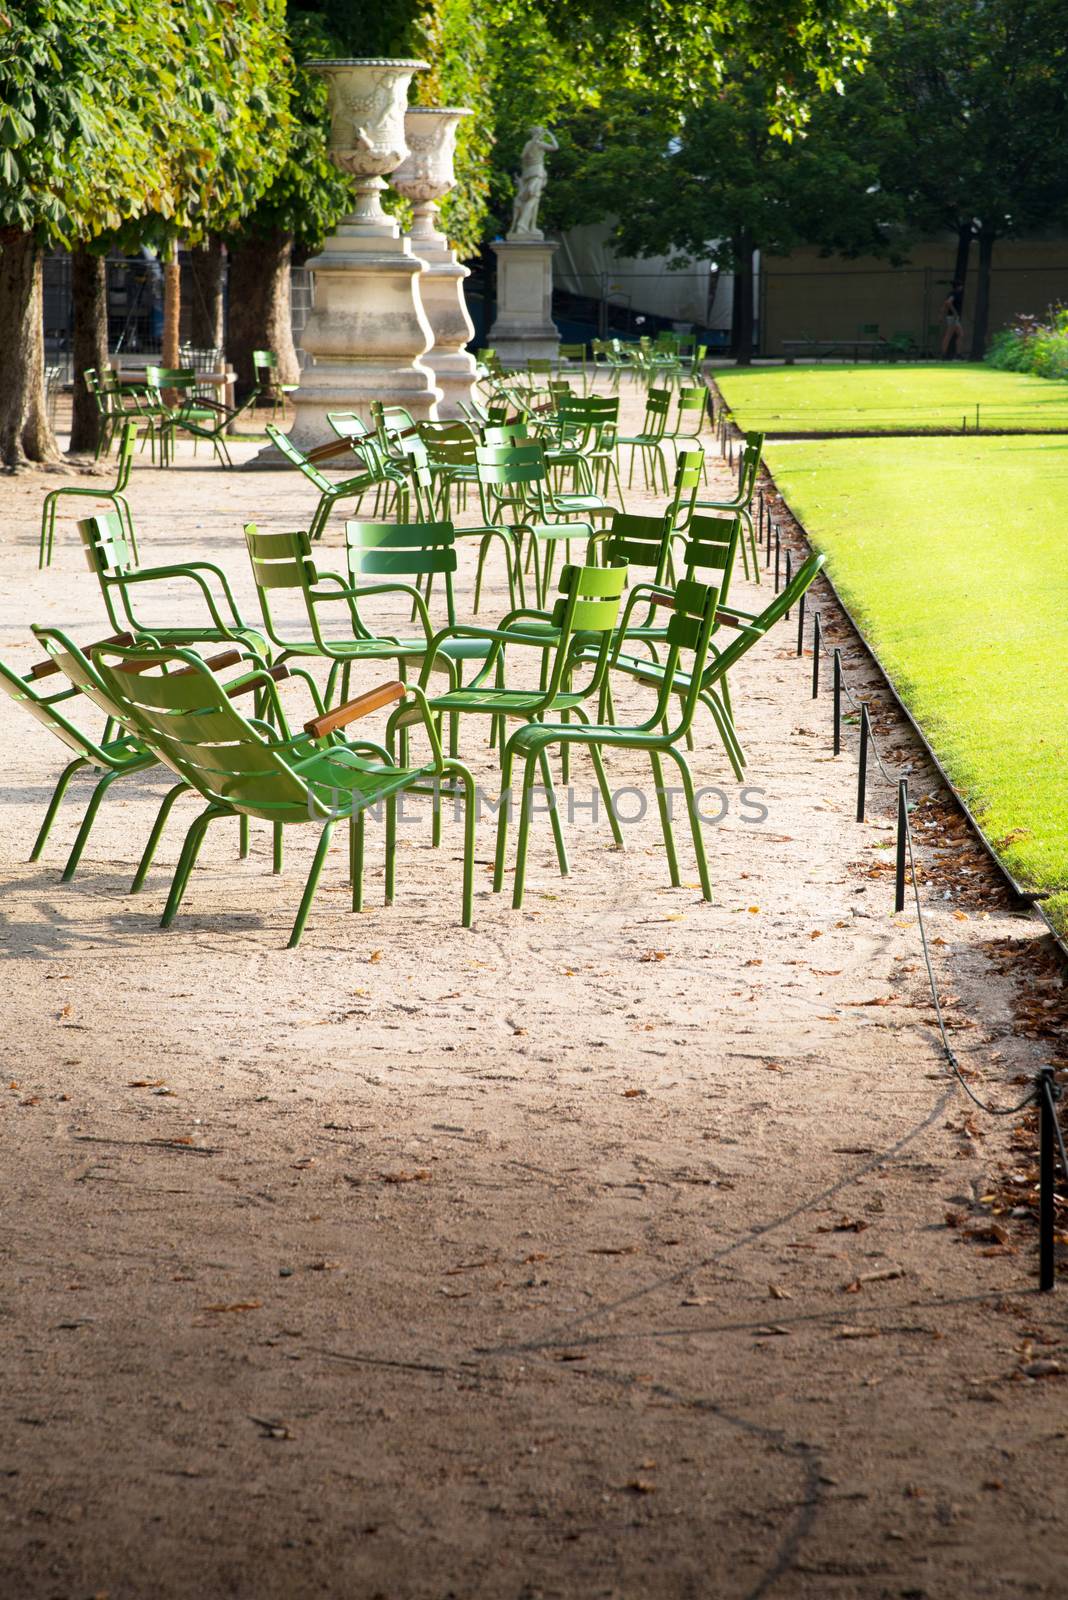 The chairs at the des Tuileries Gardens in Paris